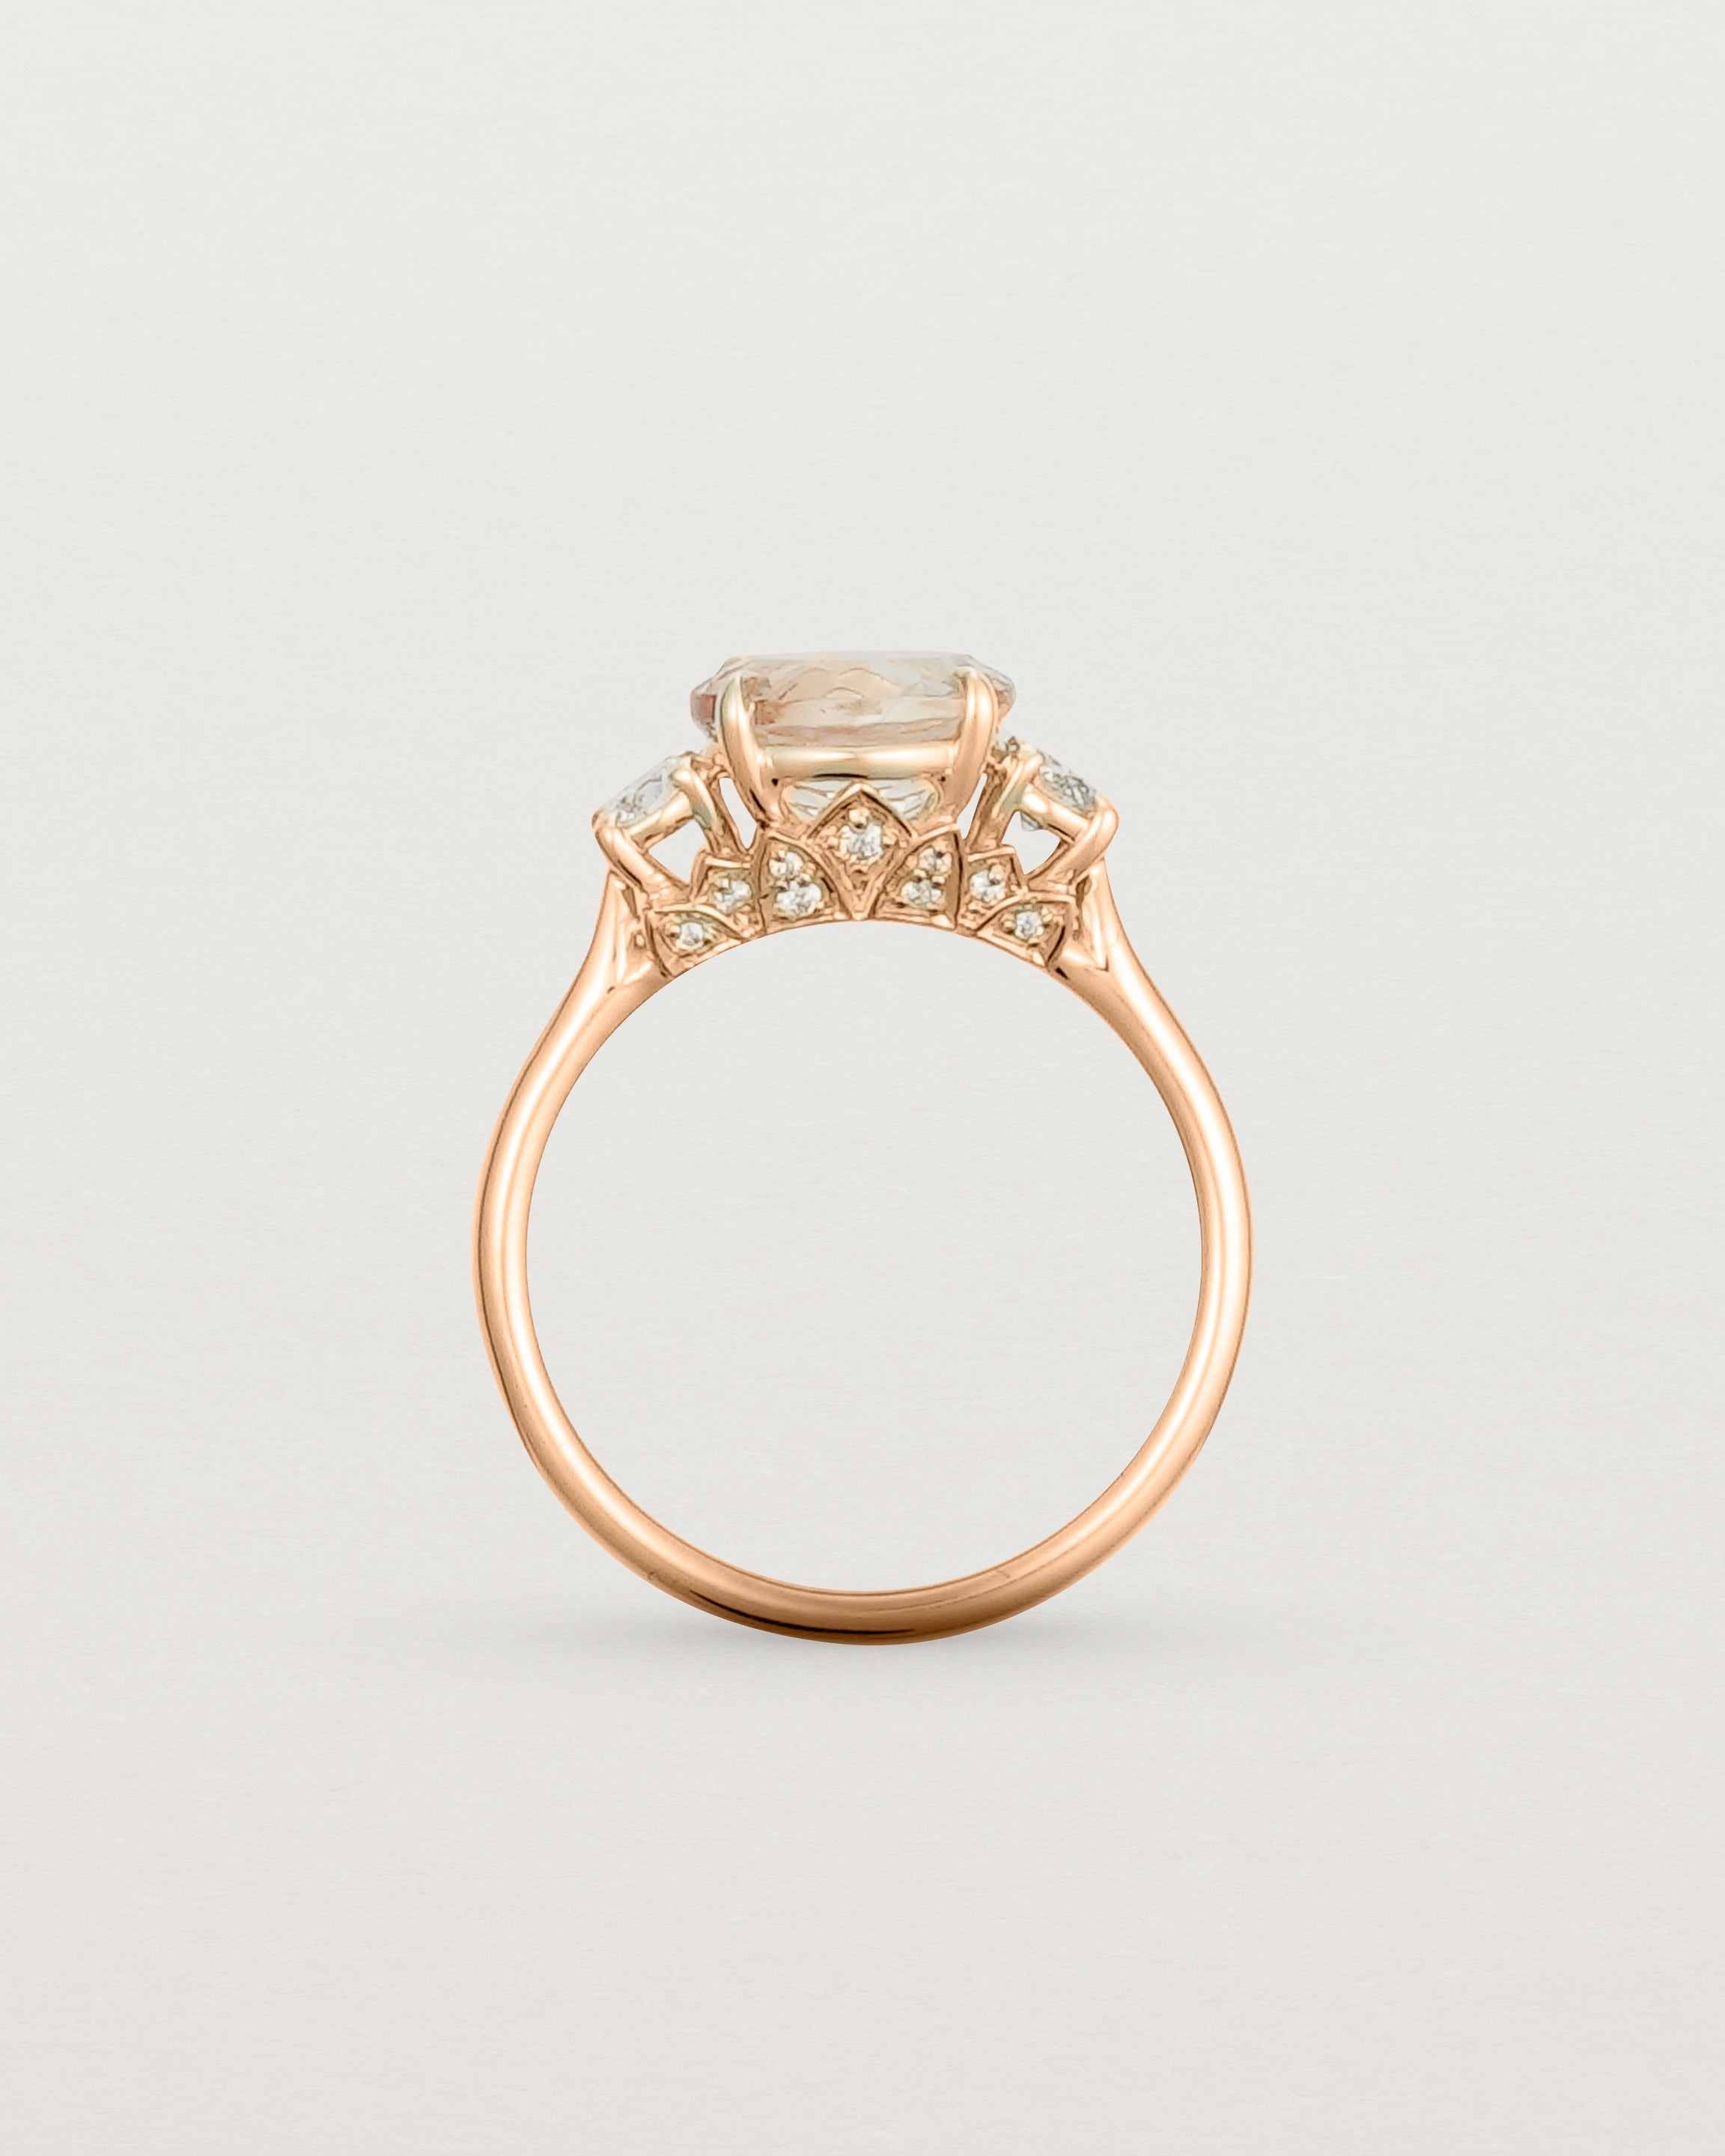 Standing view of the Laurel Round Trio Ring | Savannah Sunstone | Rose Gold.